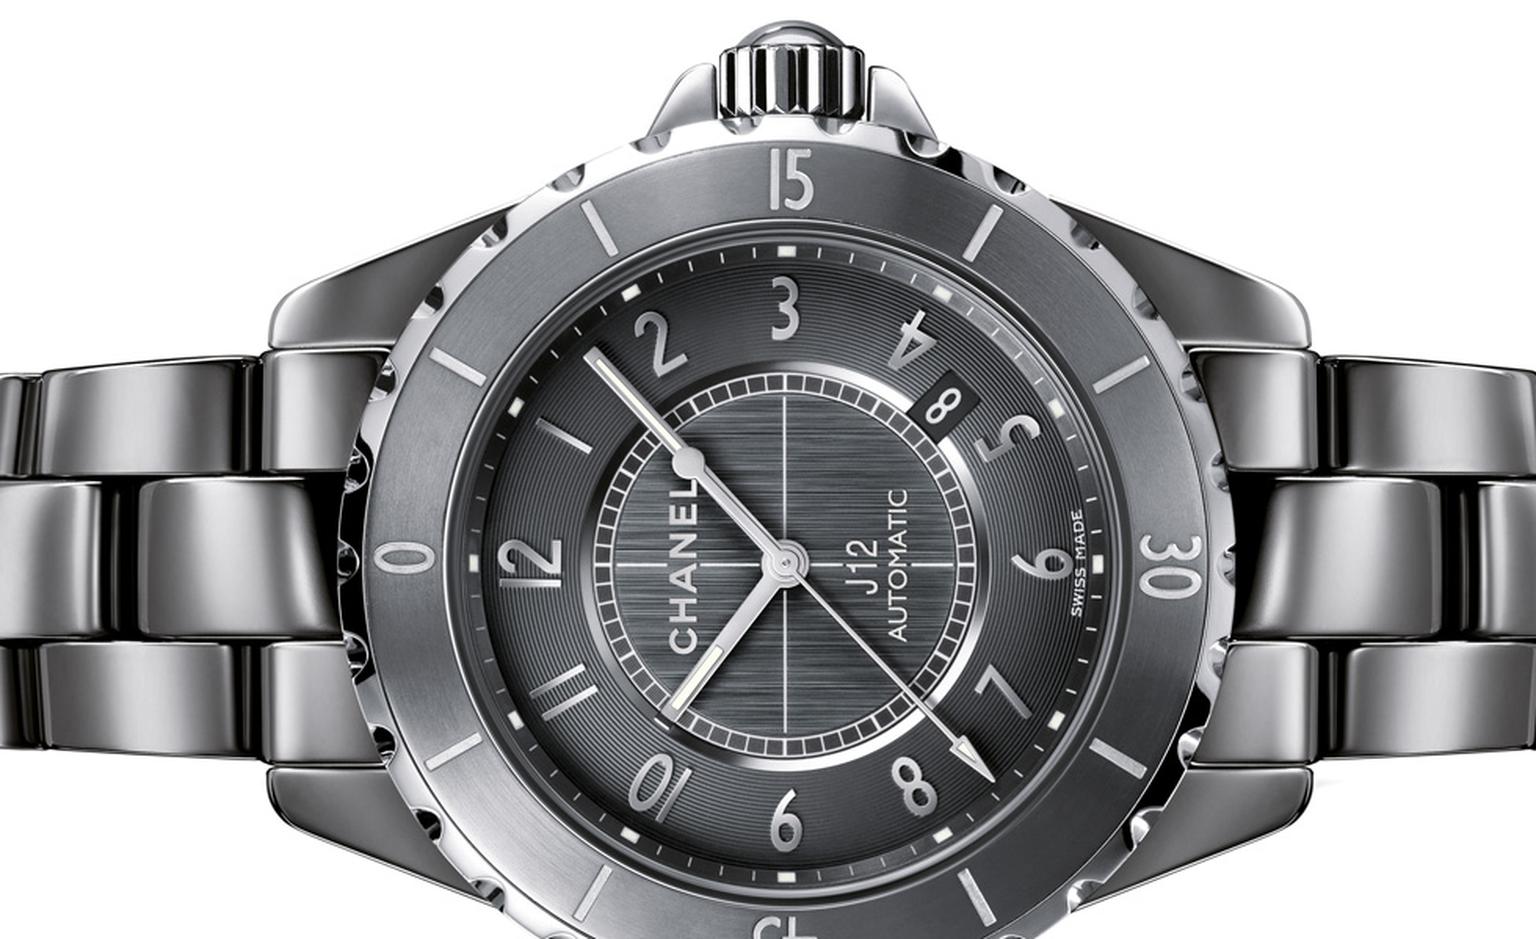 Chanel J12 Chromatic 41 mm with automatic movement and water resistant to 200 meters.